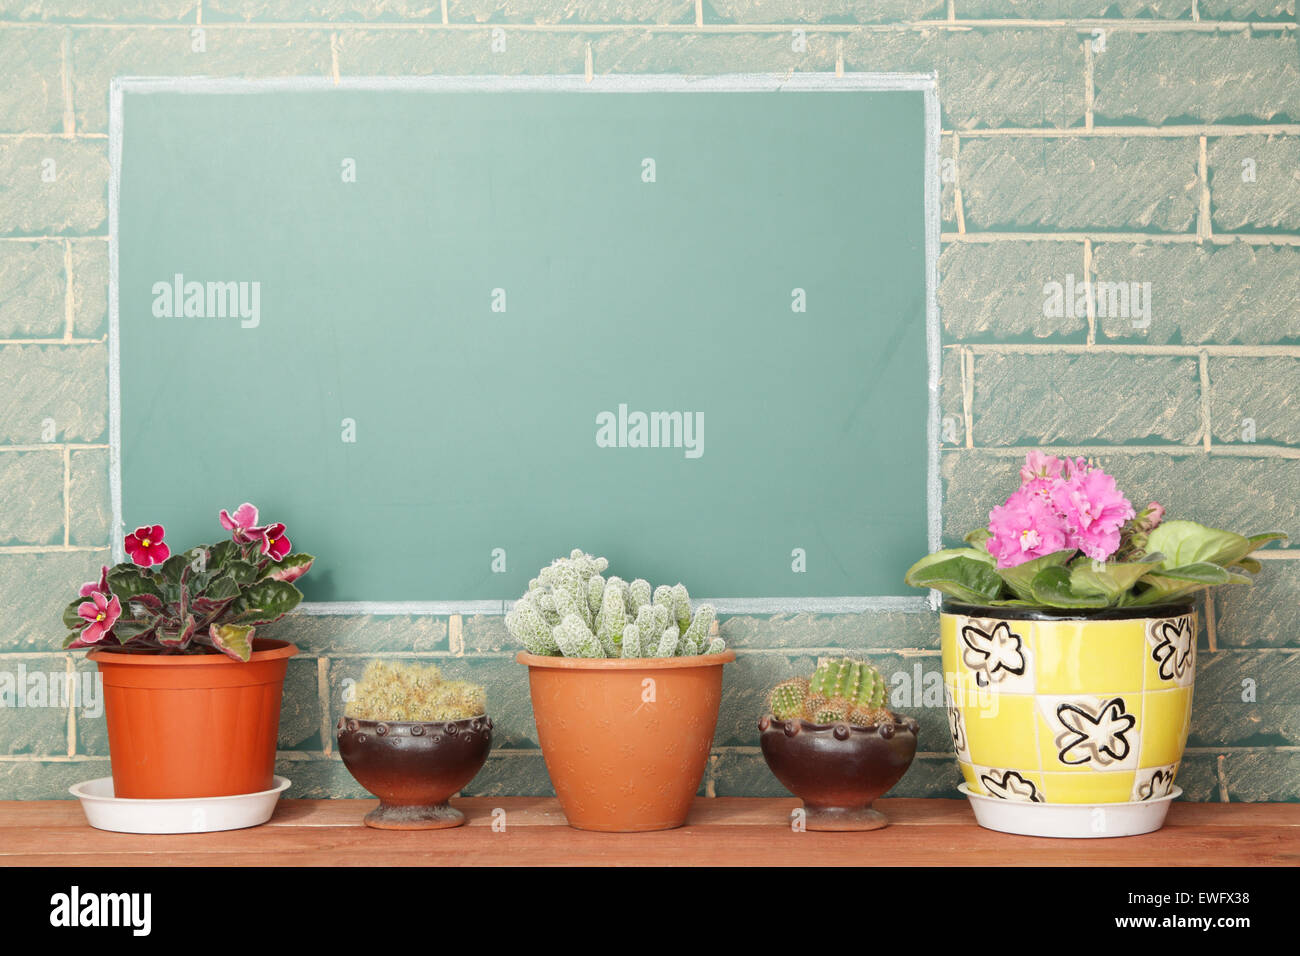 Violet flowers and cacti in flowerpots on wood stillage Stock Photo